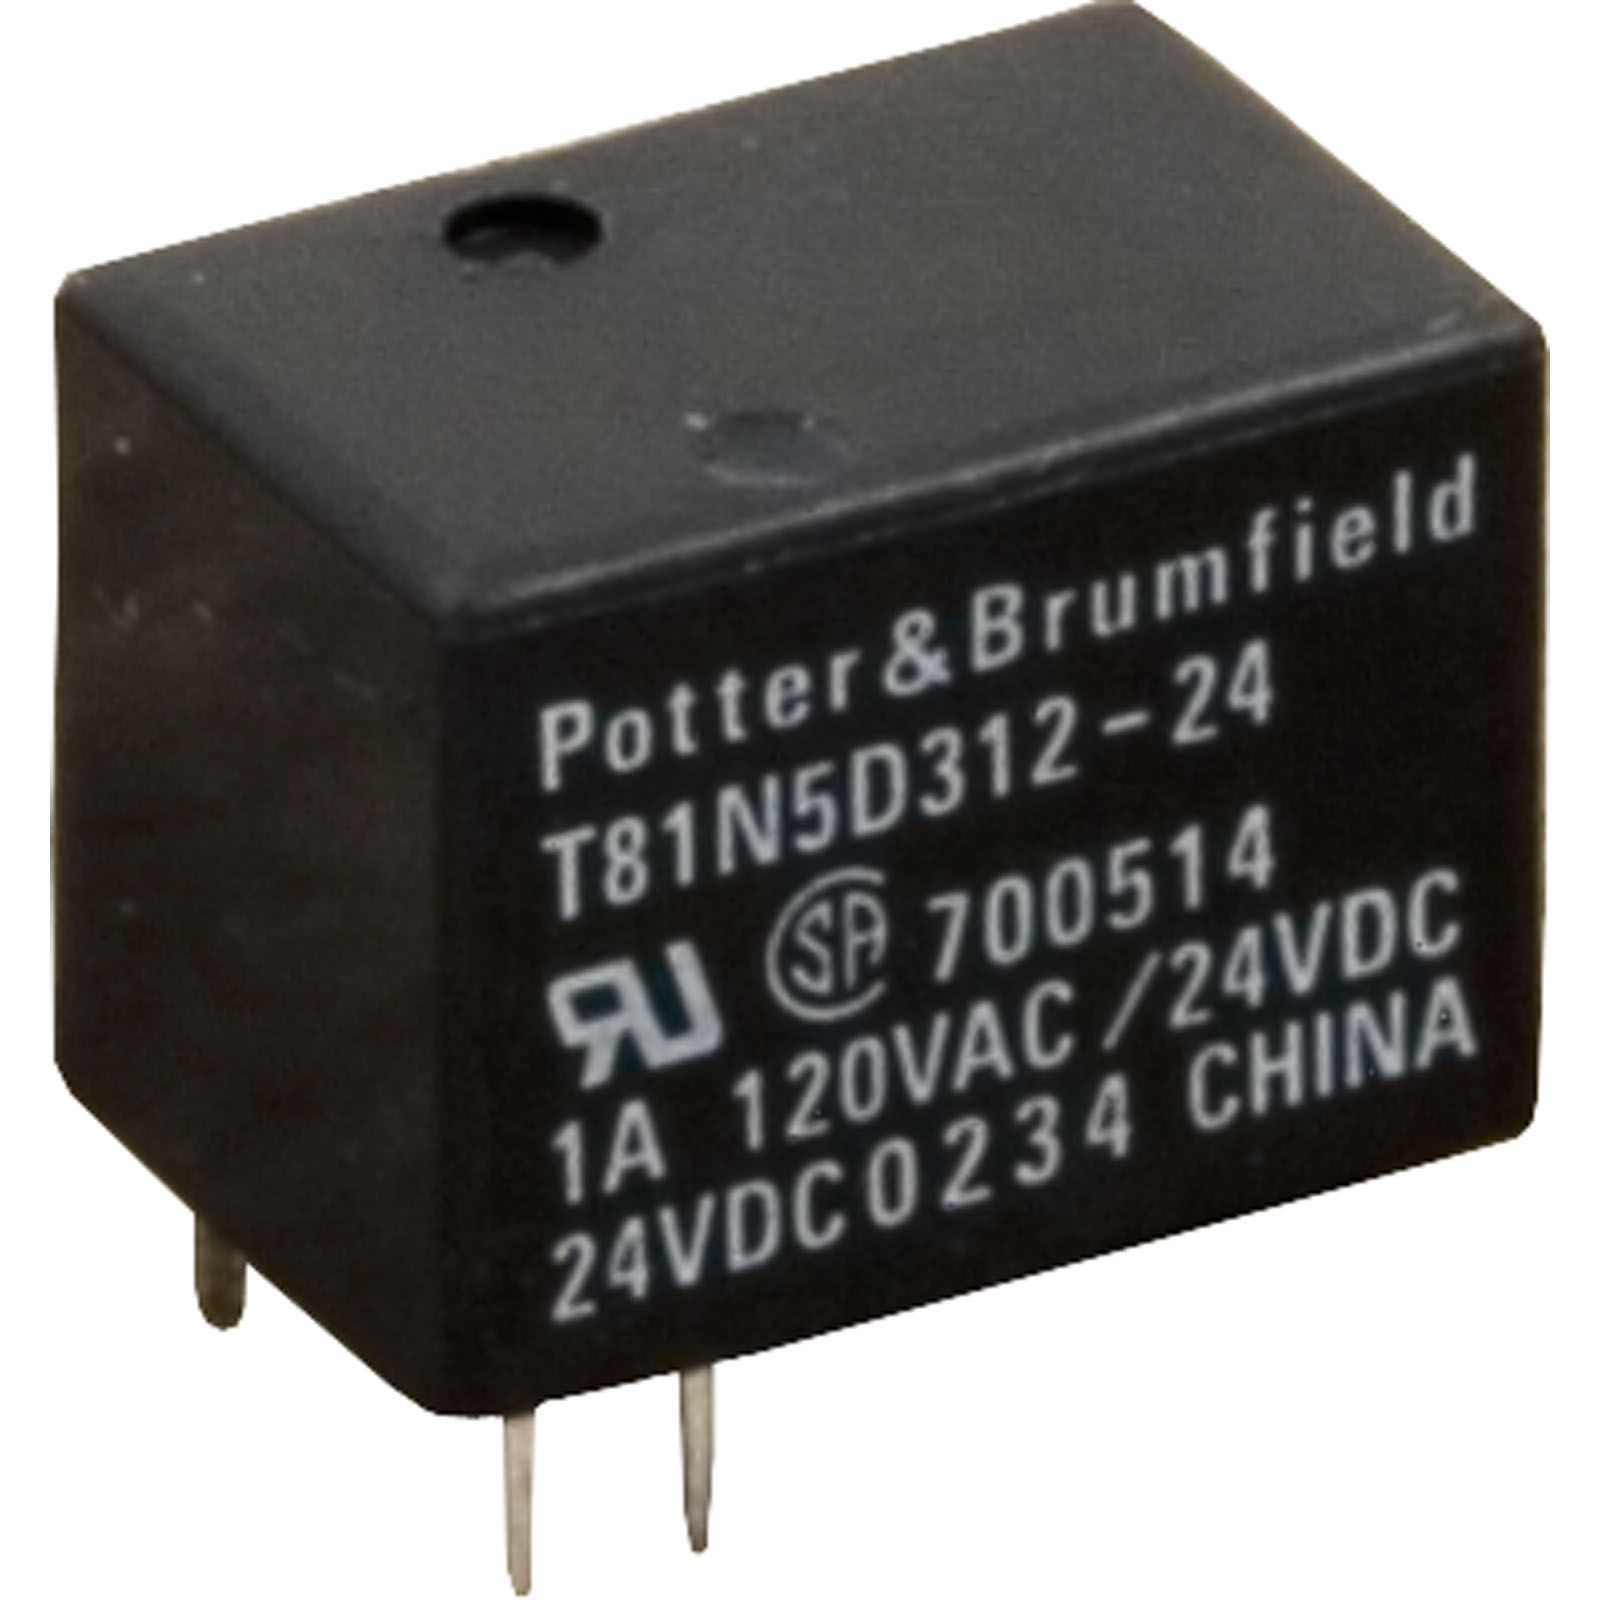 Picture of 36K2076 Relay P&B T-81 Type SPDT 1A 24VDC Jandy Boards